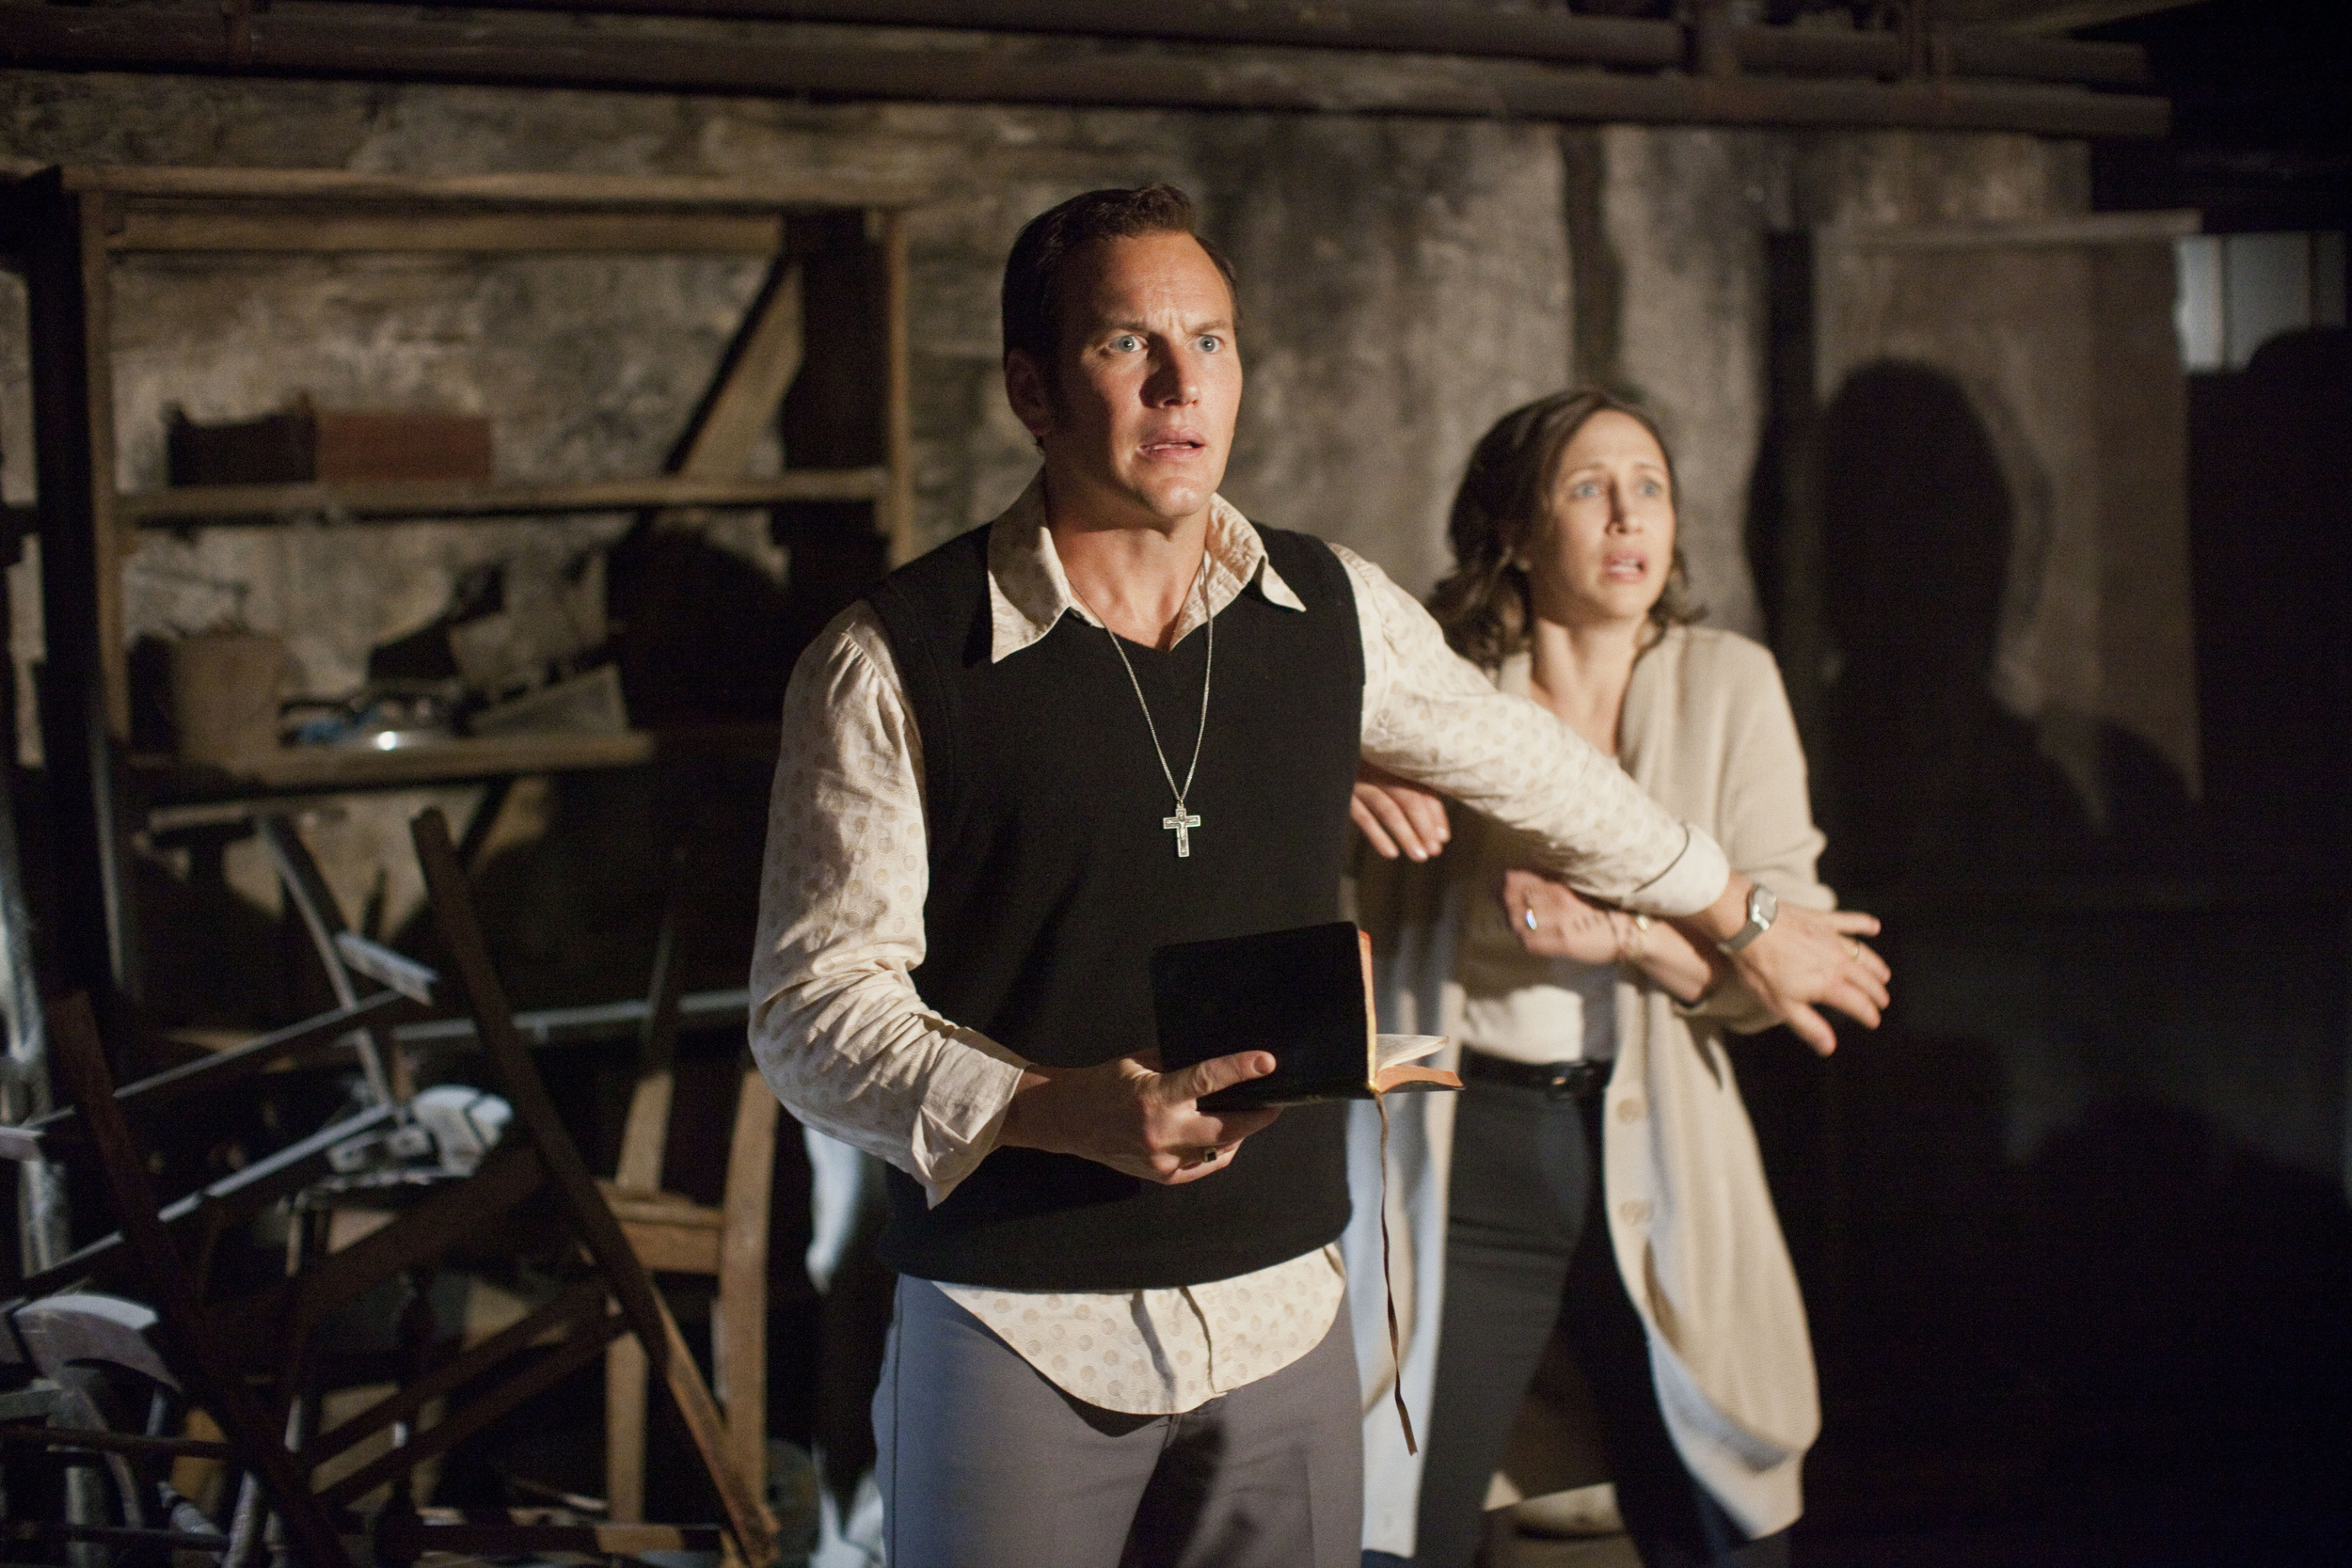 <p><em>The Conjuring </em>is entertaining in a packed theater. There's nothing fun about its premise, but it's fun to see with a bunch of terrified people.</p><p><a href='https://www.msn.com/en-us/community/channel/vid-cj9pqbr0vn9in2b6ddcd8sfgpfq6x6utp44fssrv6mc2gtybw0us'>Follow us on MSN to see more of our exclusive entertainment content.</a></p>